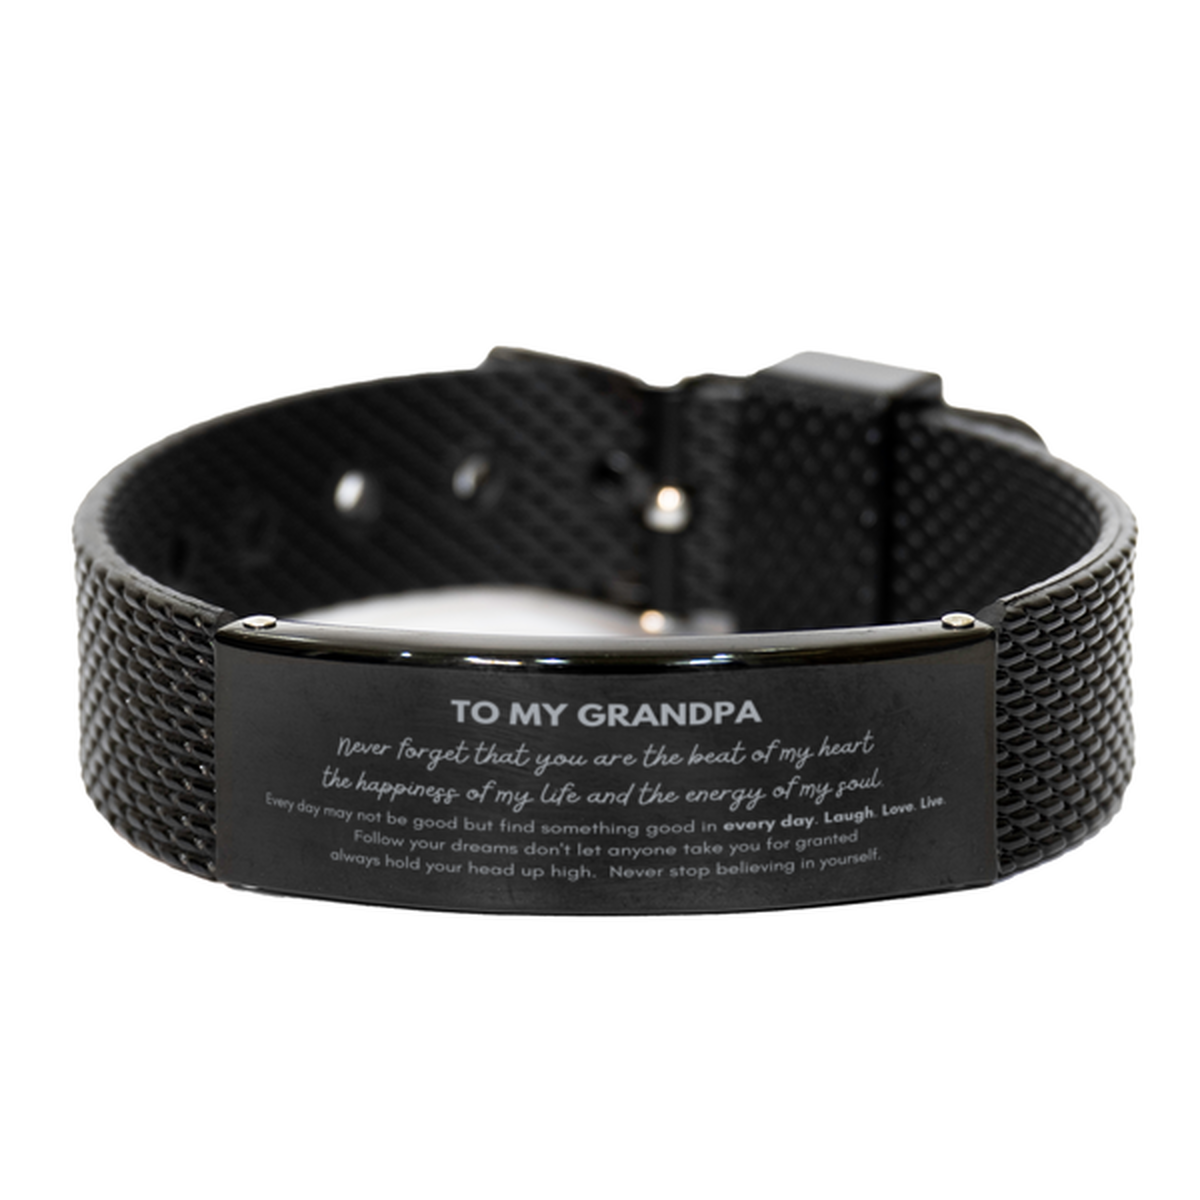 To My Grandpa Bracelet Gifts, Christmas Grandpa Black Shark Mesh Bracelet Present, Birthday Unique Motivational For Grandpa, To My Grandpa Never forget that you are the beat of my heart the happiness of my life and the energy of my soul